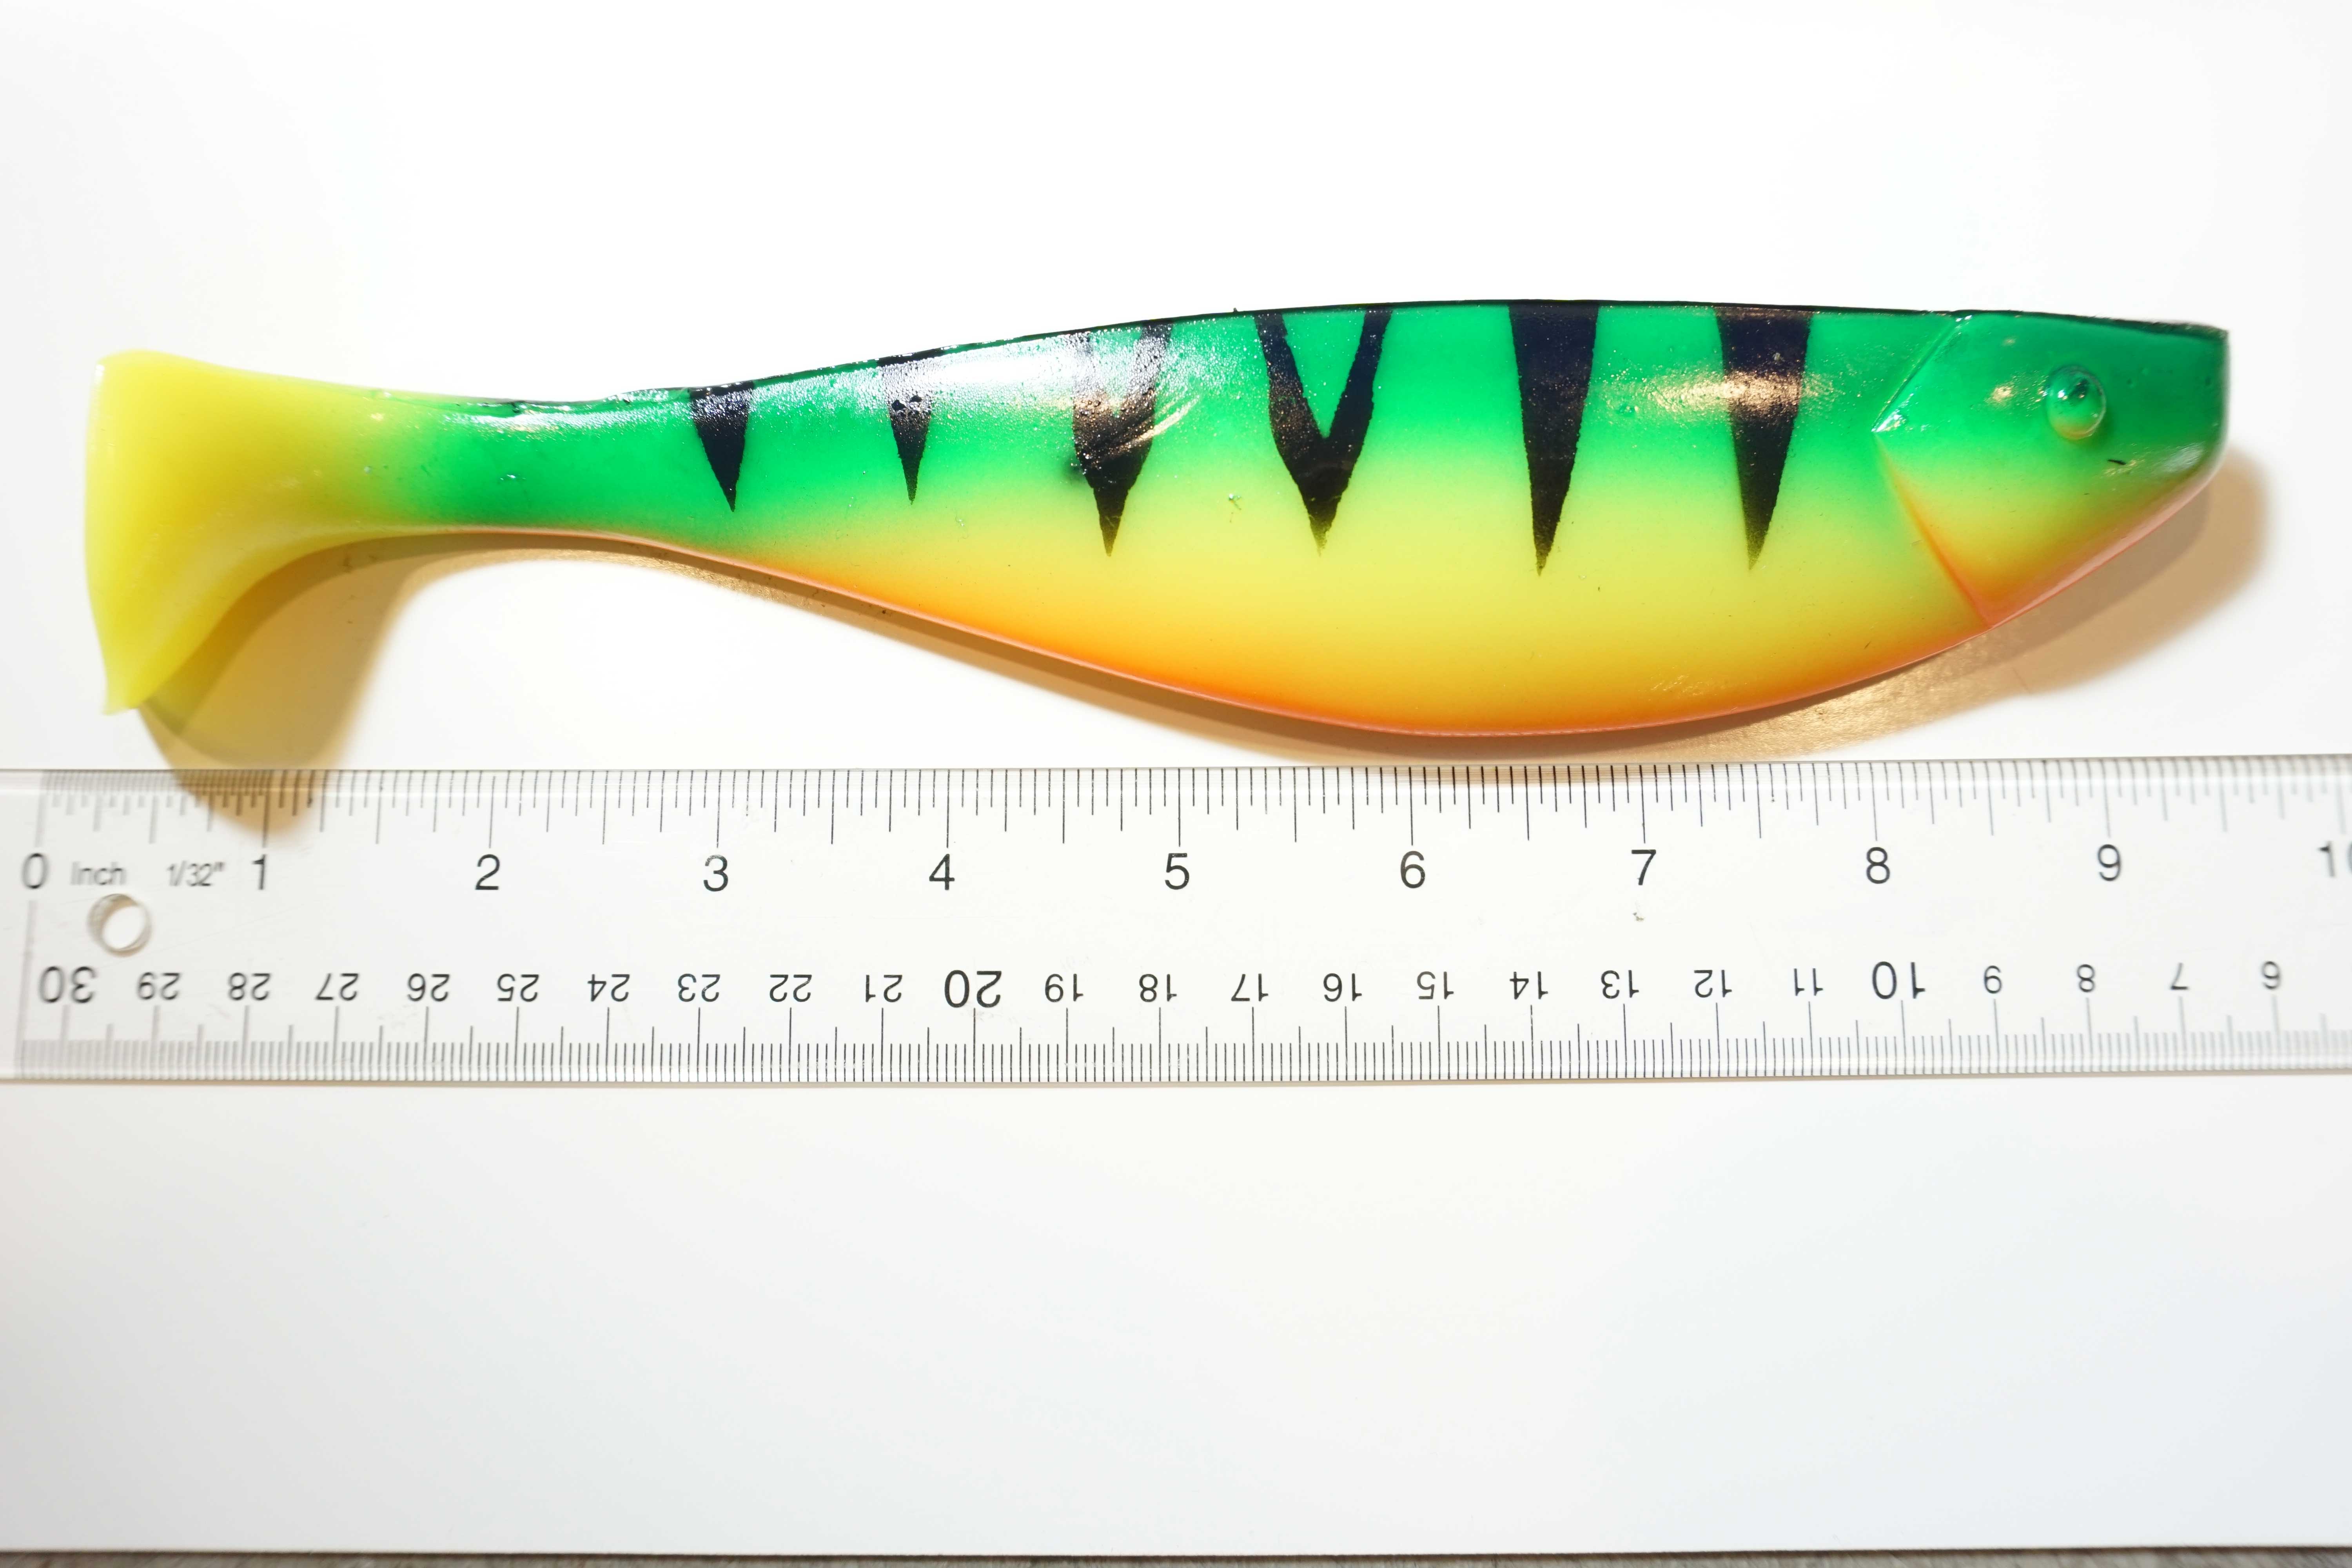 Soft Paddle Tail Shad Fire Tiger 9"